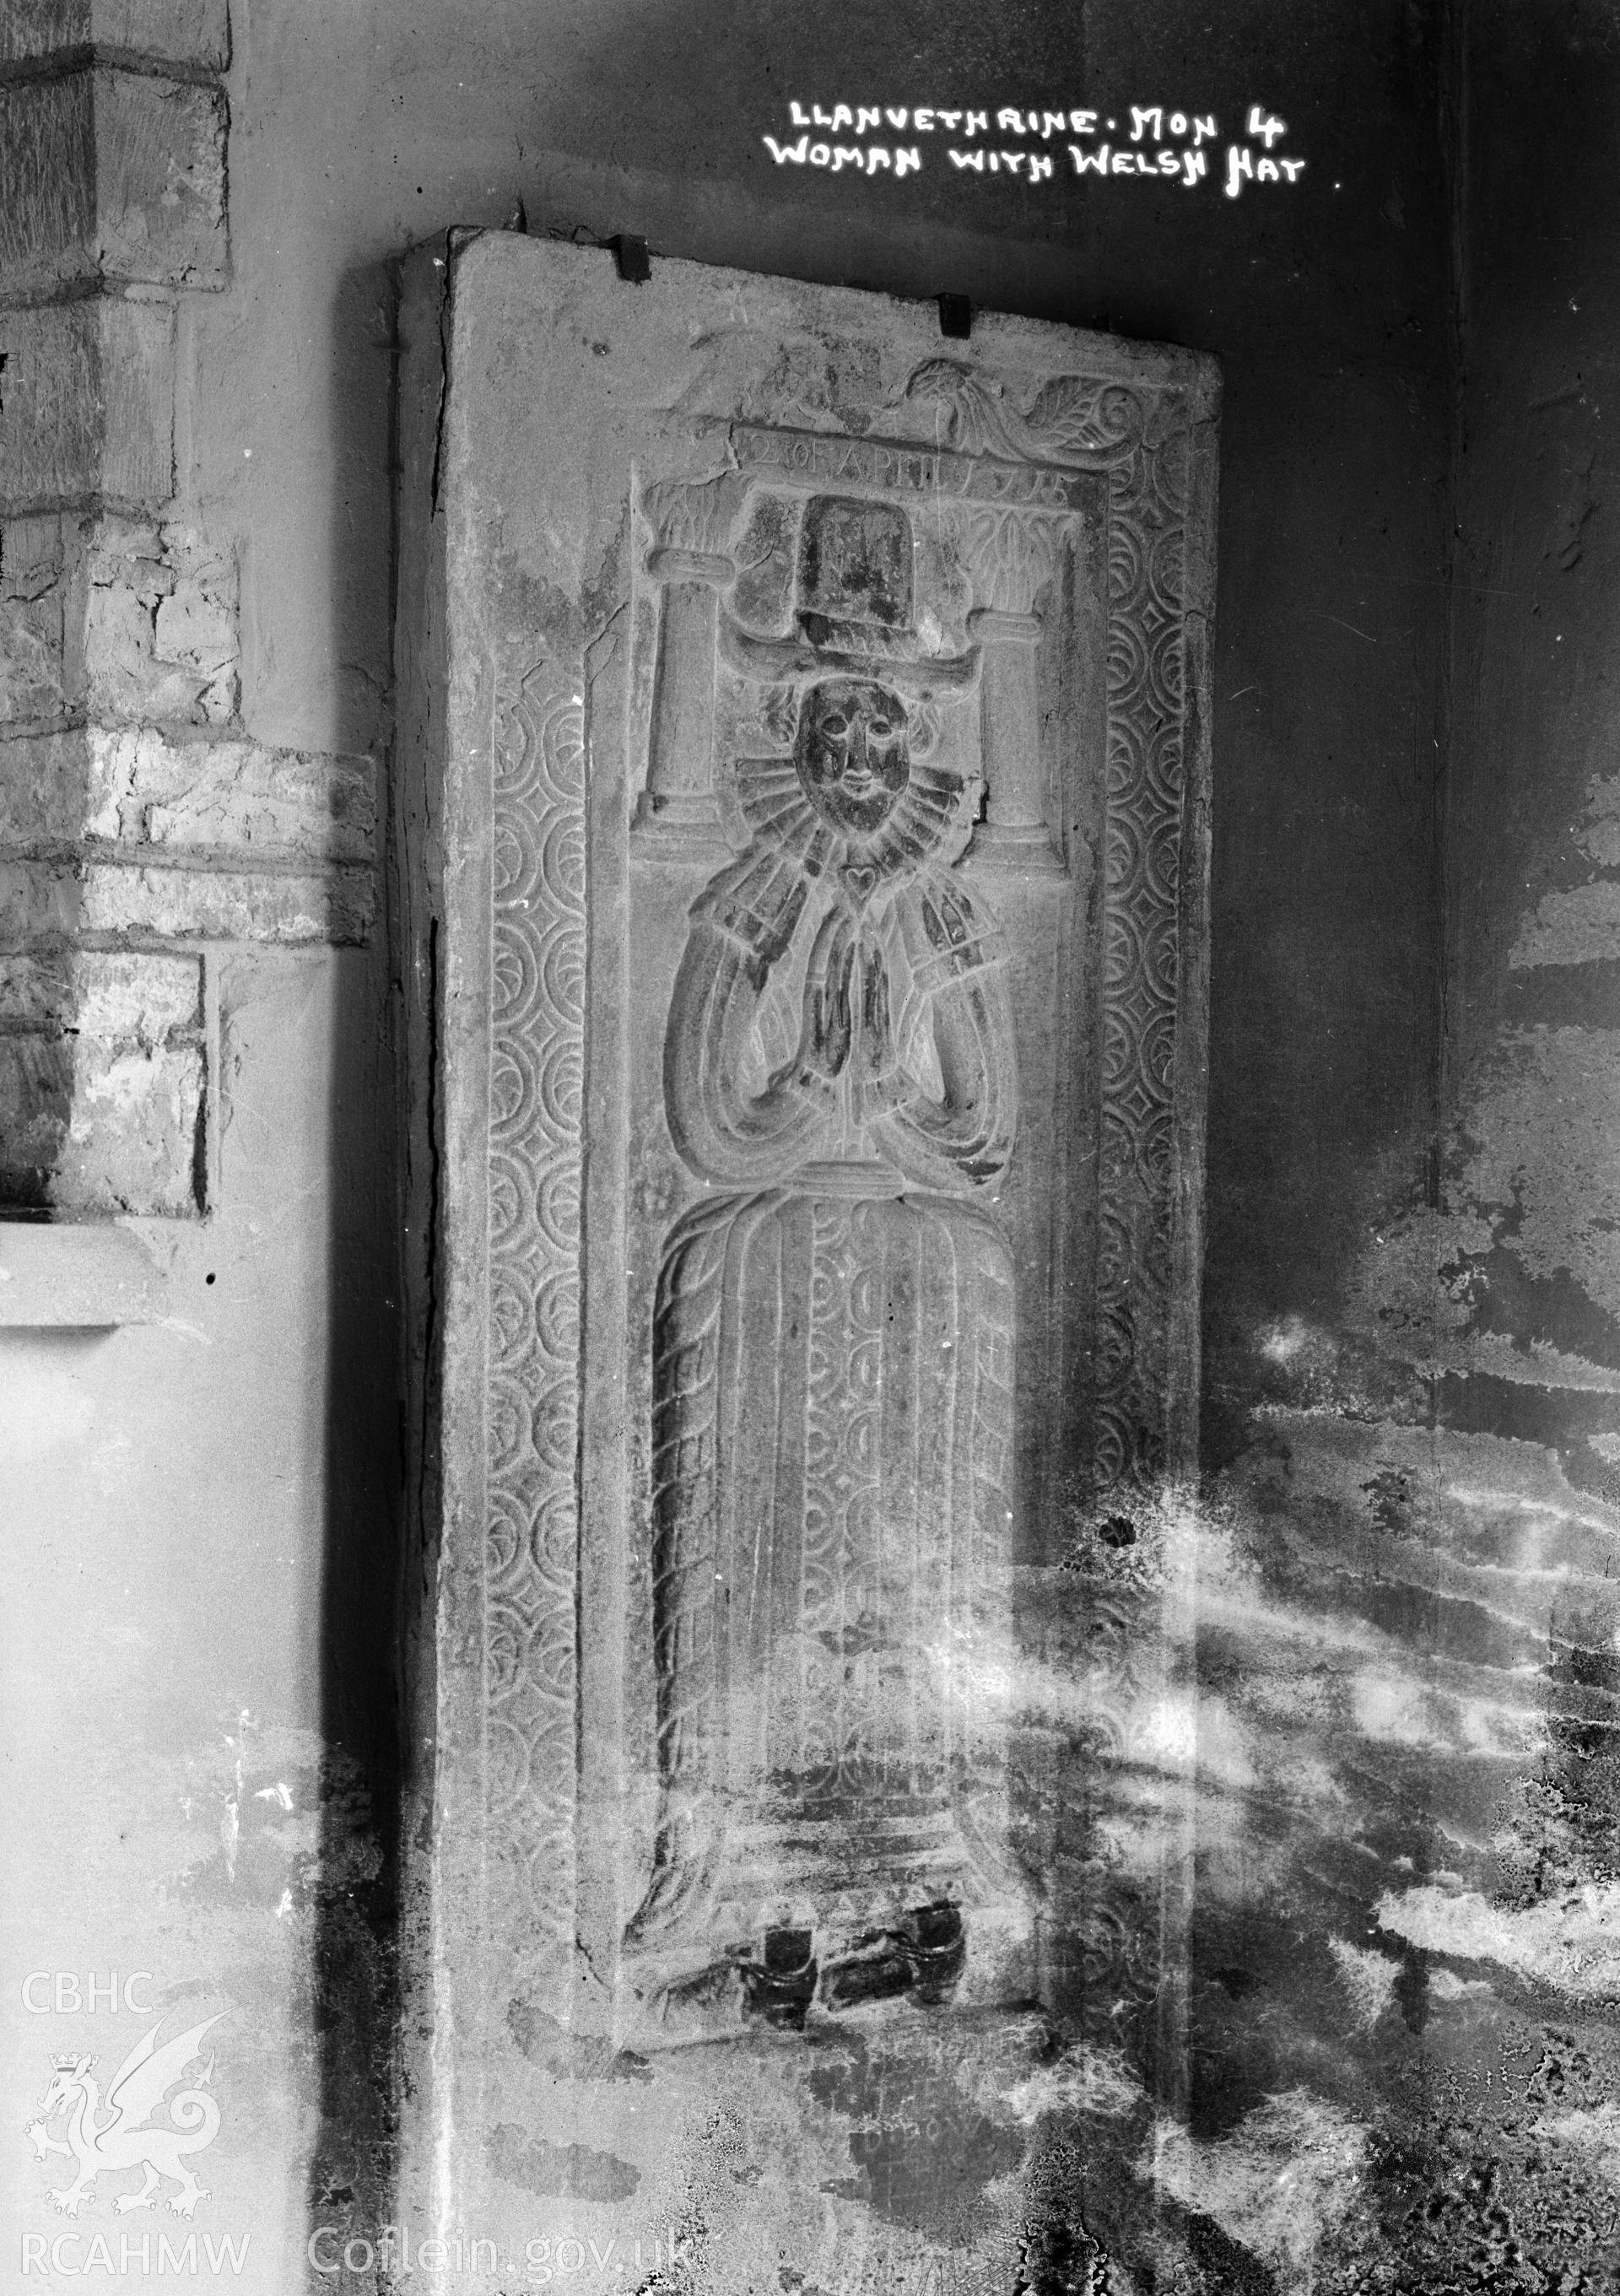 Photo showing inscribed slab at Llanvetherine Church, featuring a female figure.